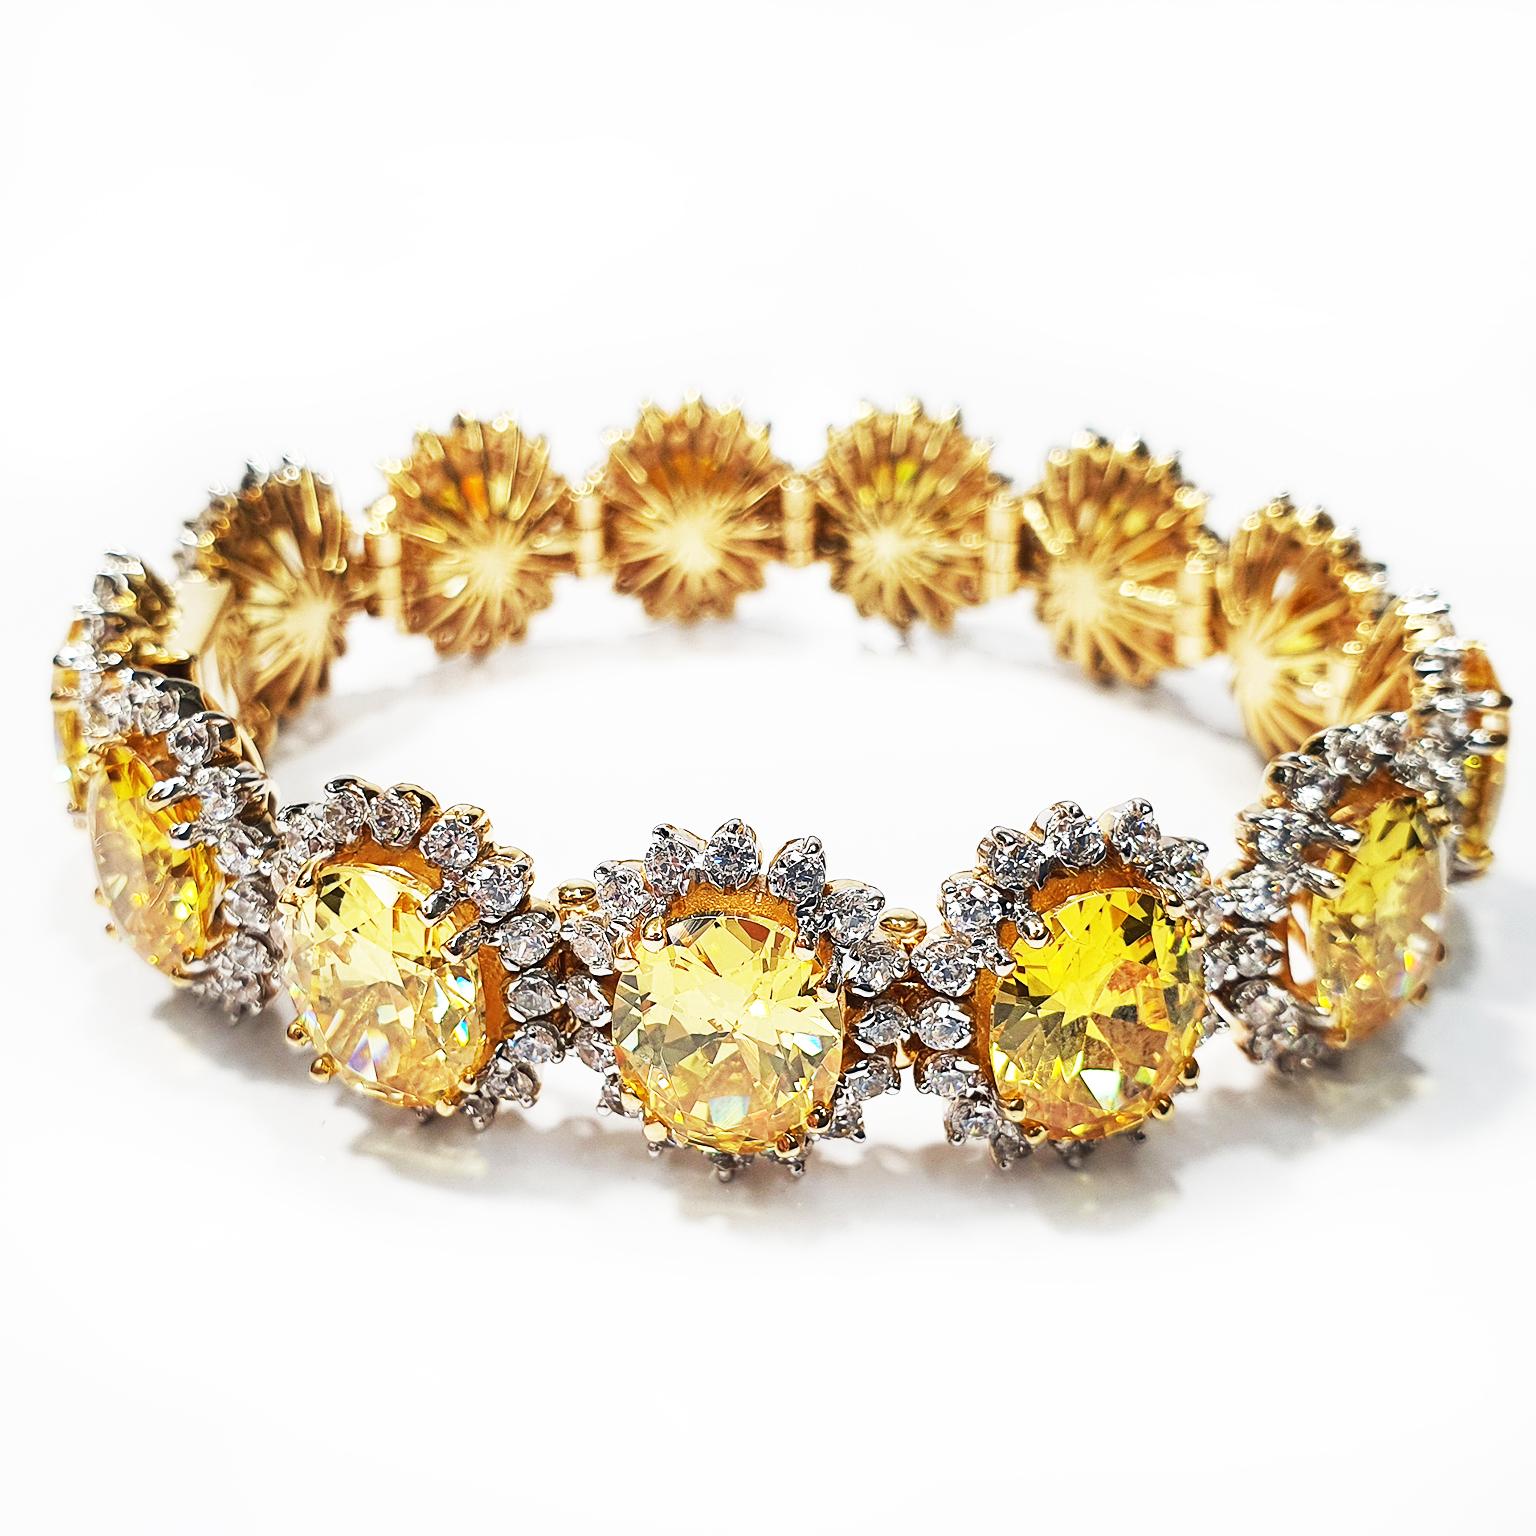 The Swarovski crystal bracelet is crafted from 9K yellow gold with yellow and white Swarovski crystals. The bracelet contains 13 large 11mm x 9mm yellow colour matched oval Swarovski crystals with each oval surrounded by 16 x 2mm round white